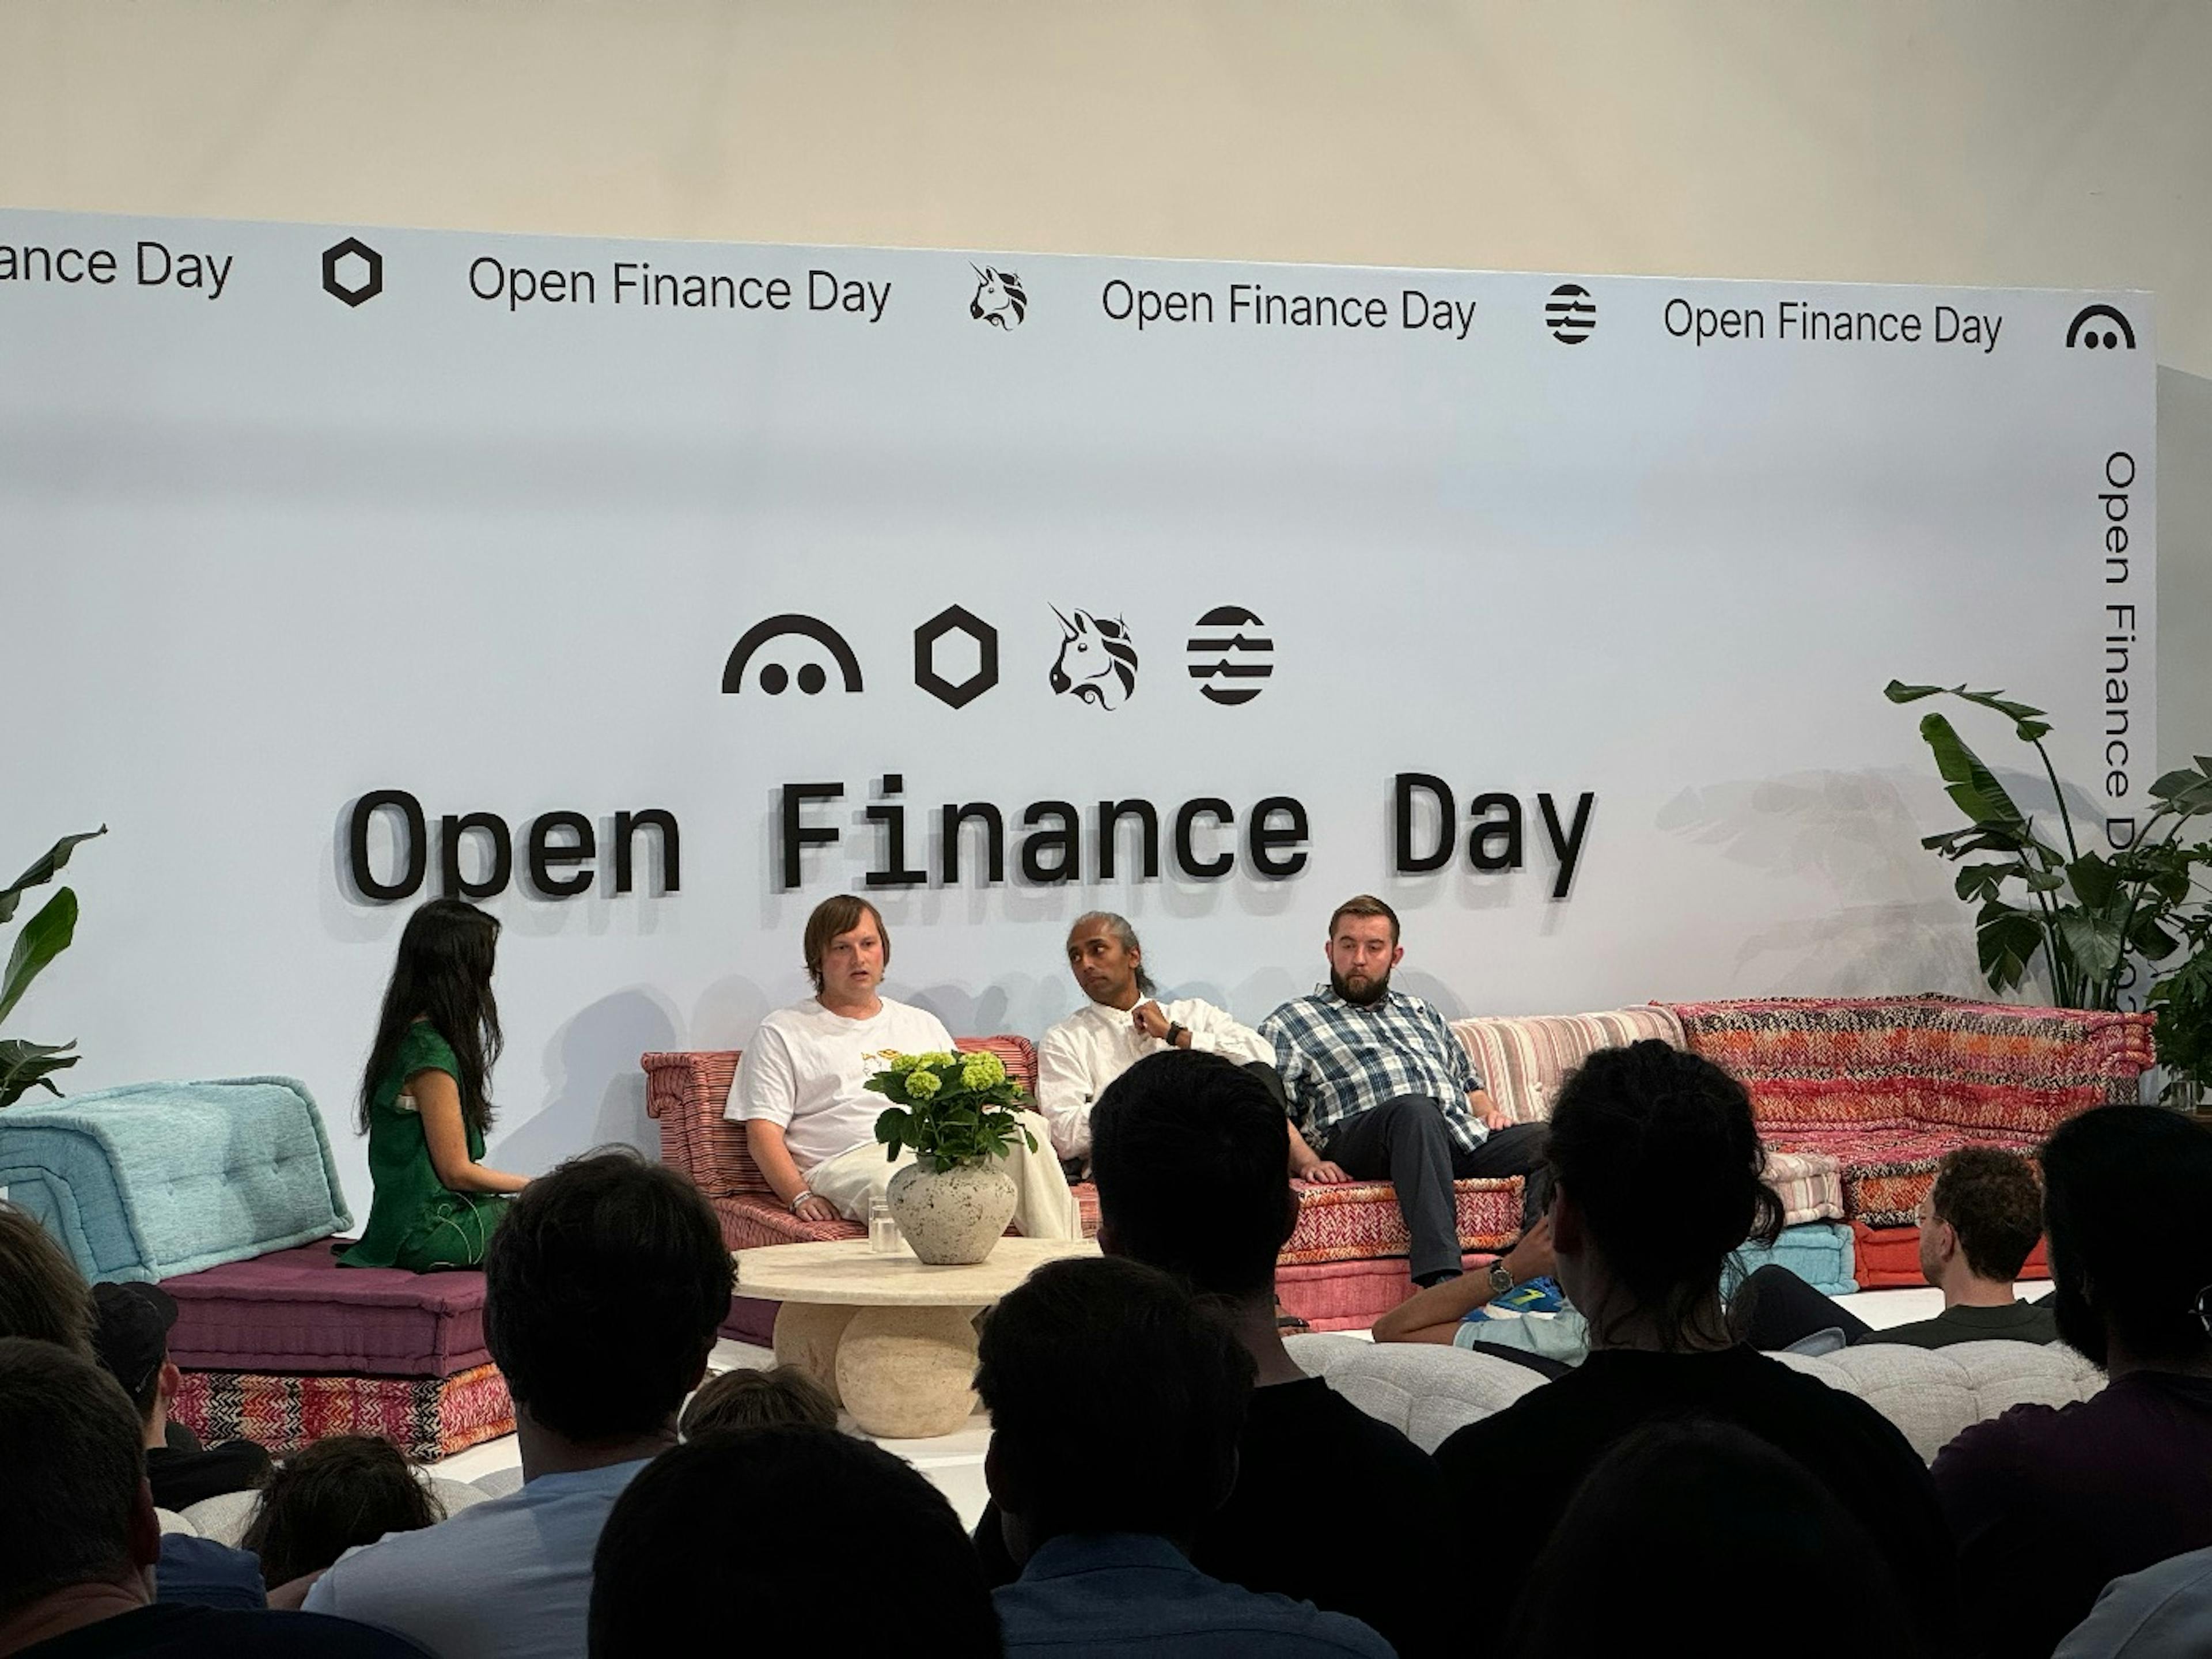 Stani Kulechov, Mo Shaikh, and Sergey Nazarov at Open Finance Day on the panel moderated by Laura Shin